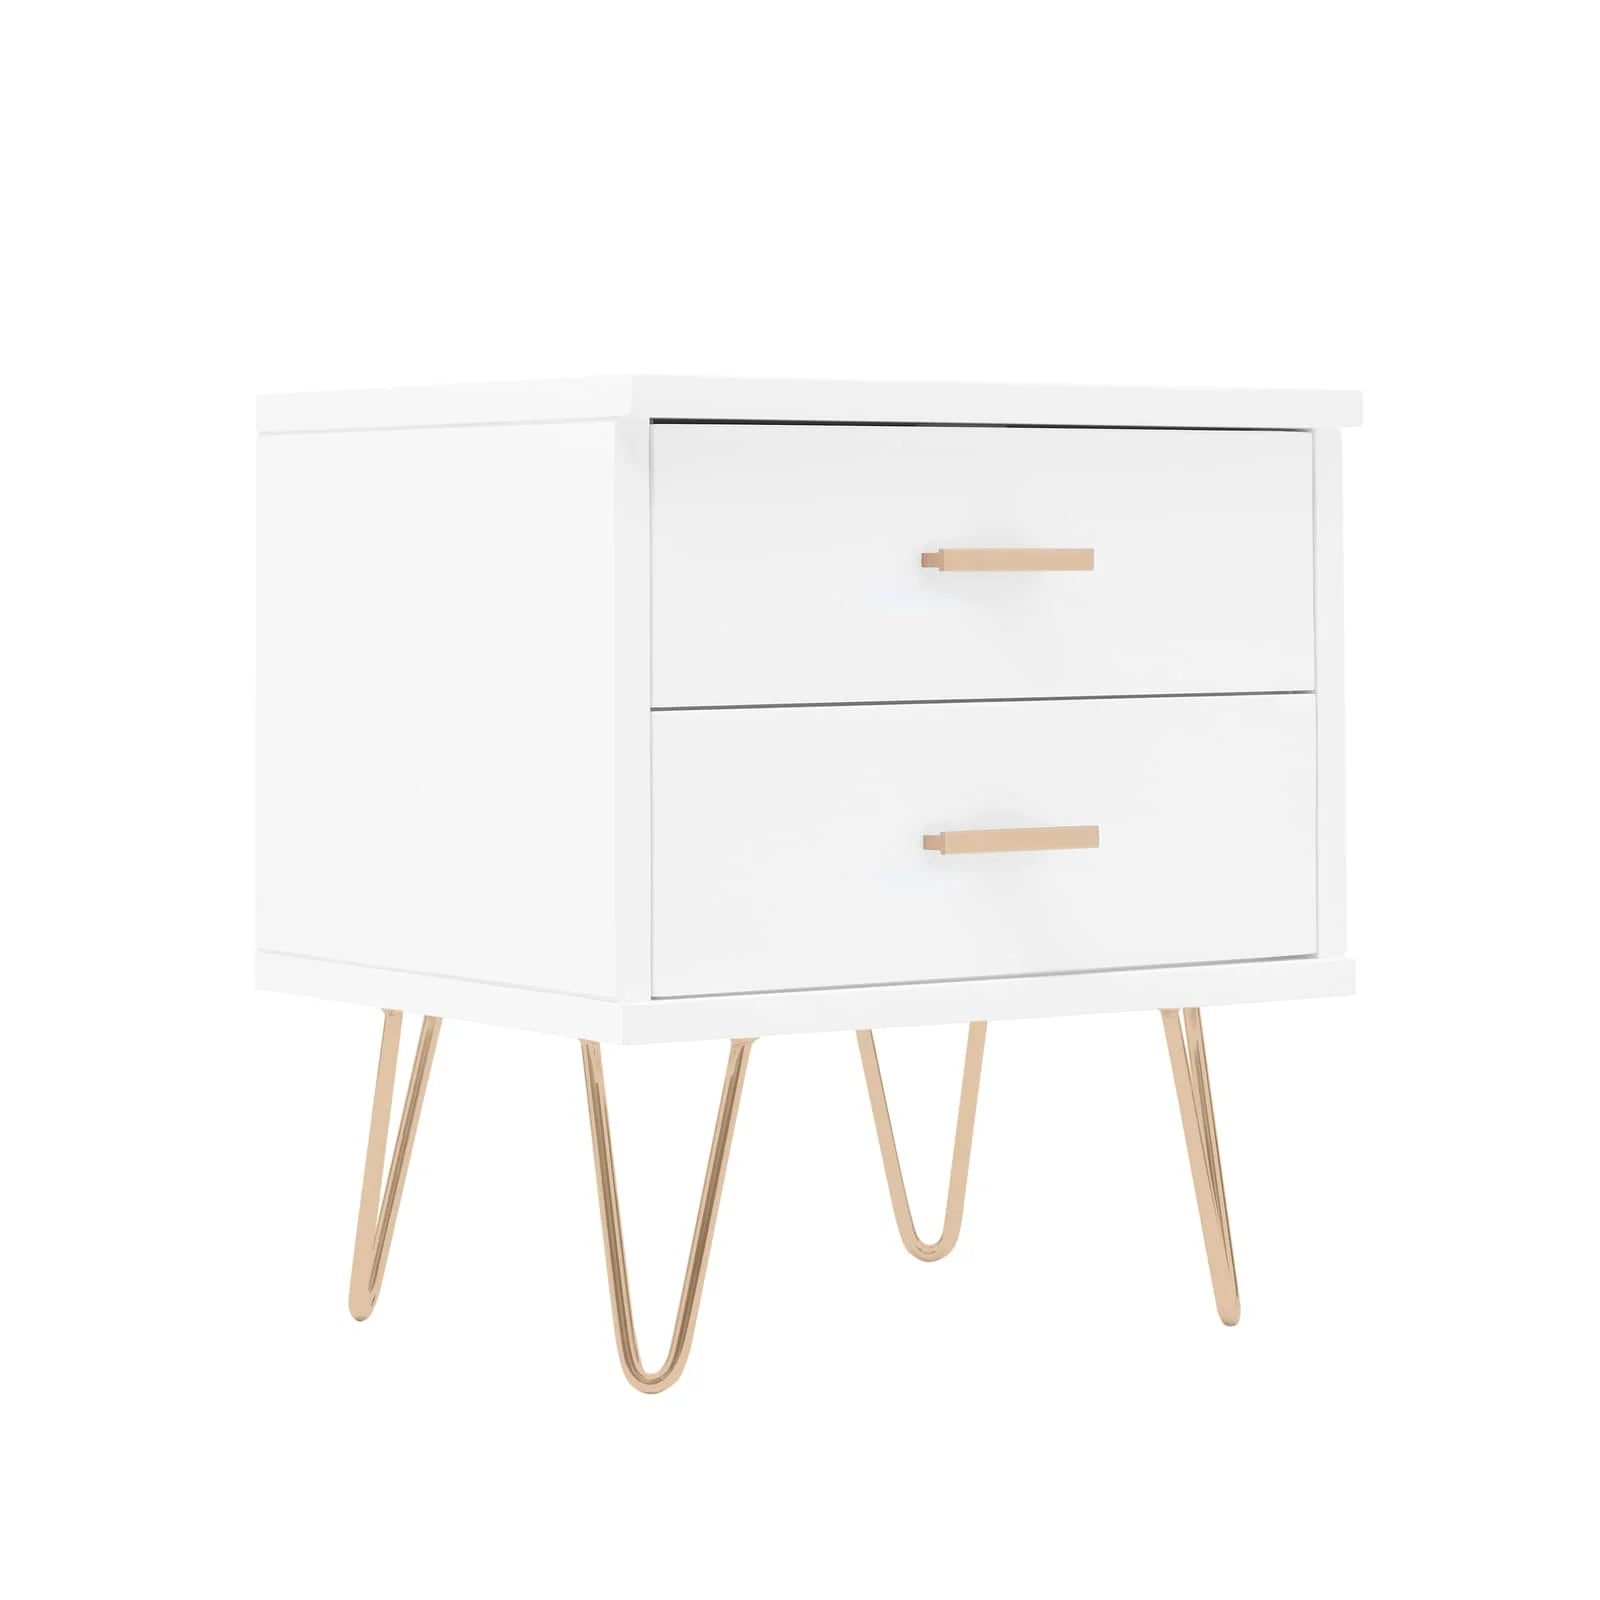 Monroe white painted solid wood bedside table with 2 drawers and metal hardware | malletandplane.com